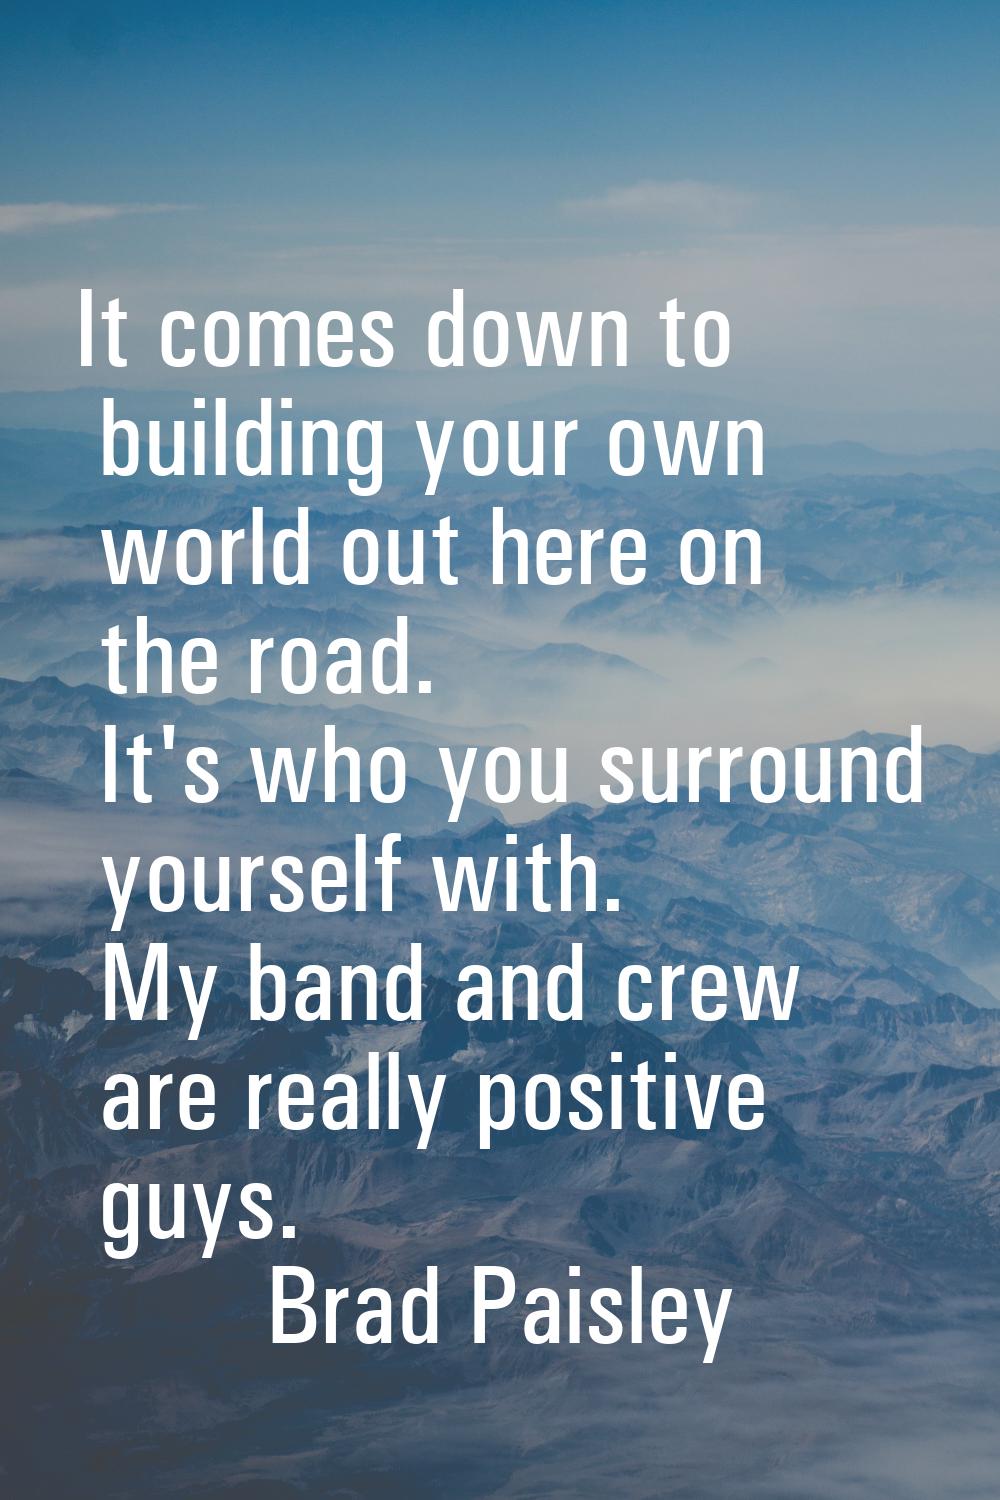 It comes down to building your own world out here on the road. It's who you surround yourself with.